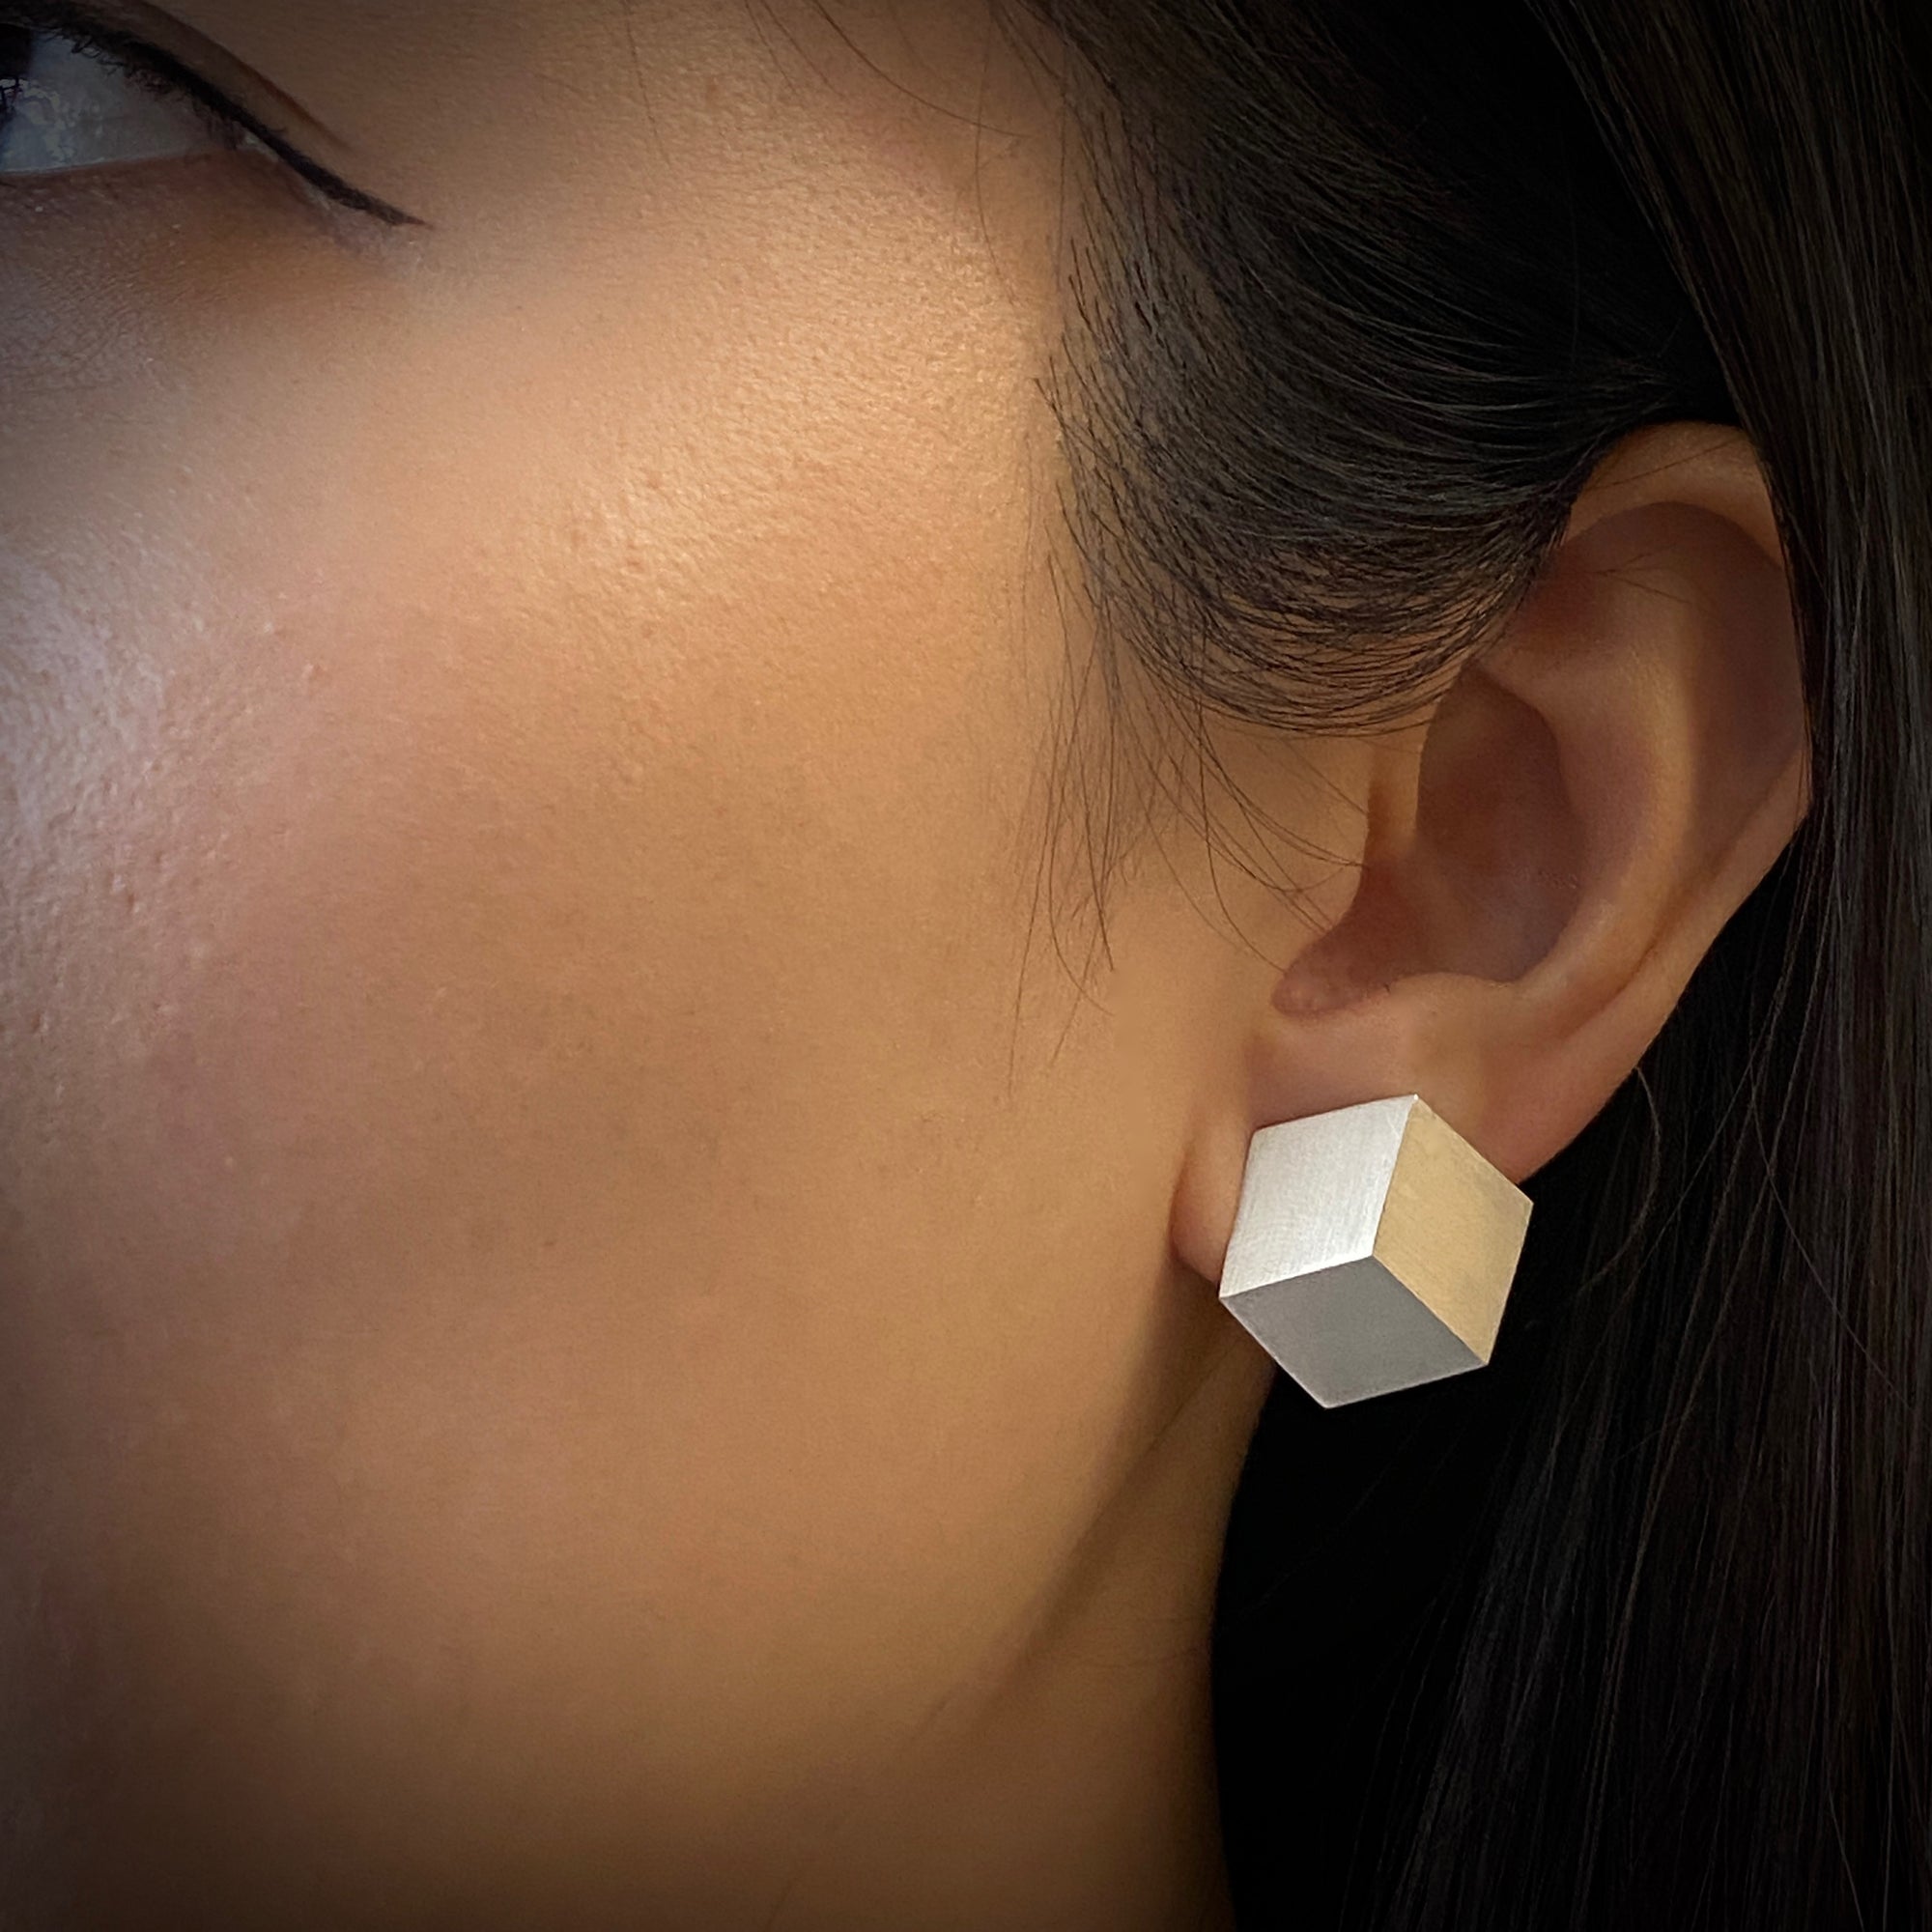 Three dimensional, cube earrings in sterling silver by Michele Mercaldo